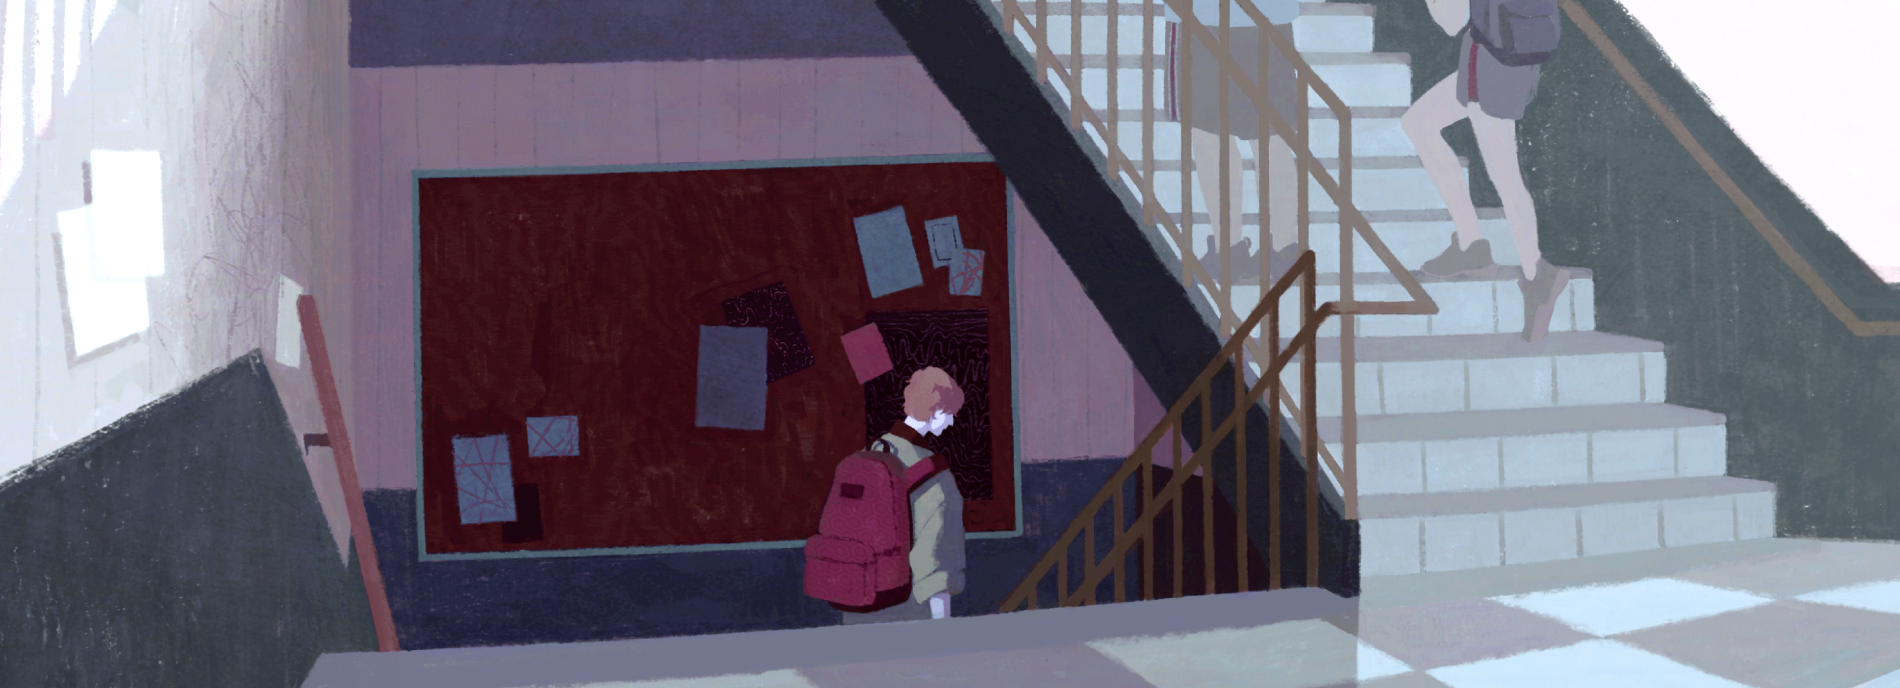 A schoolboy descends down a flight of stairs. The illustration evokes a feeling of both loneliness and sadness.